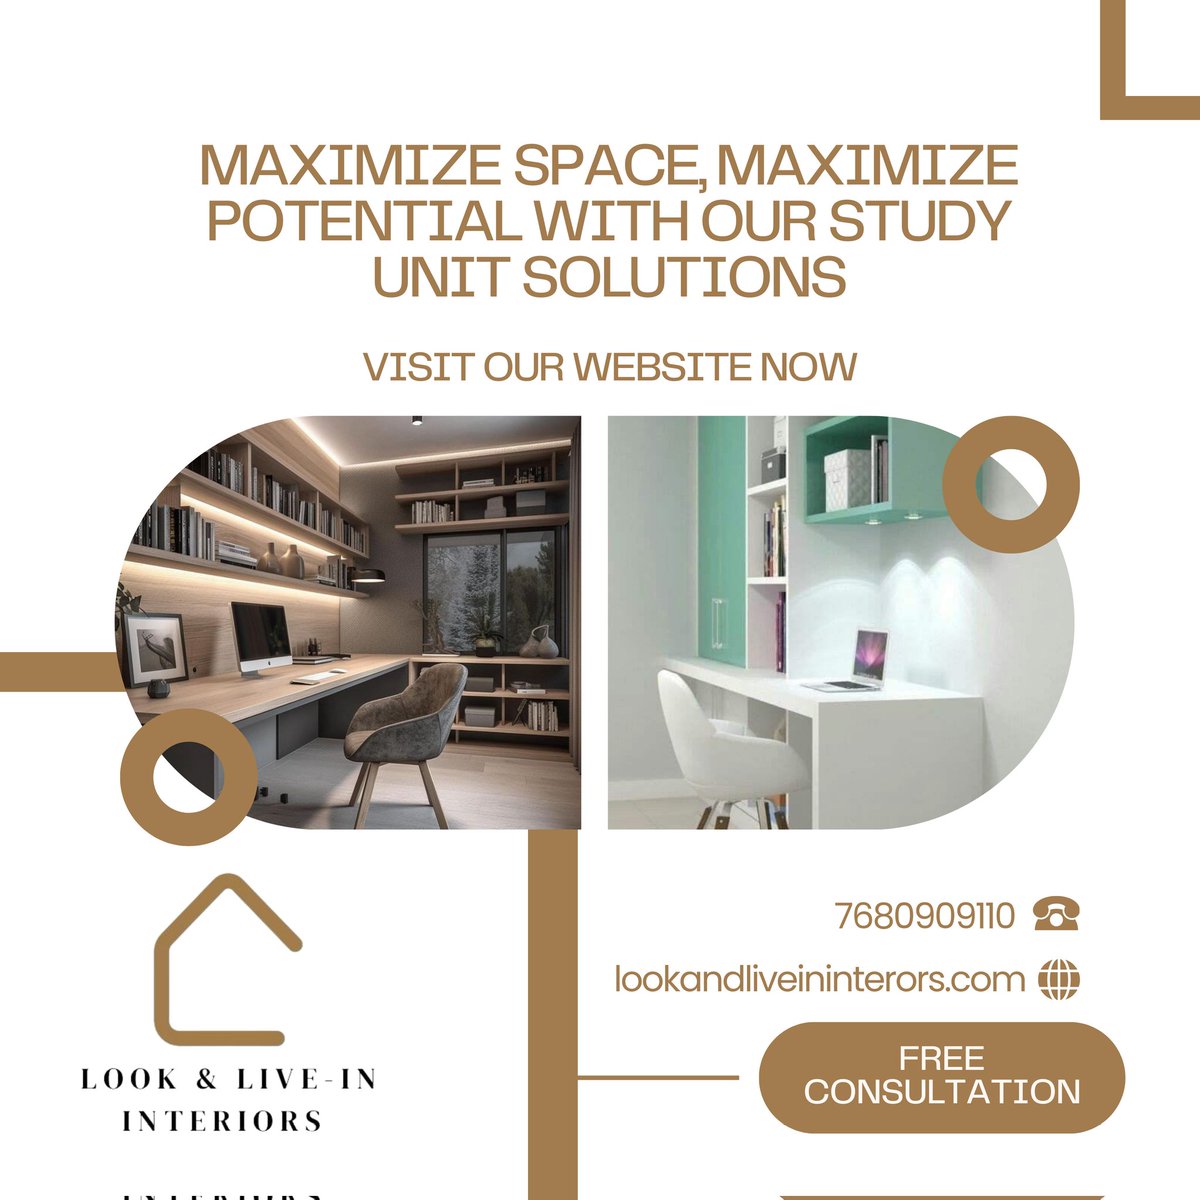 Whether you have a dedicated study room or a cozy corner, our study unit solutions help you make the most of your space #interiores #italiandesign #interiordesign #interiorstyling #interiorstyling #homeinterior #homeinteriors #homedecor #homedesign #hyderabadinteriorsdesigners